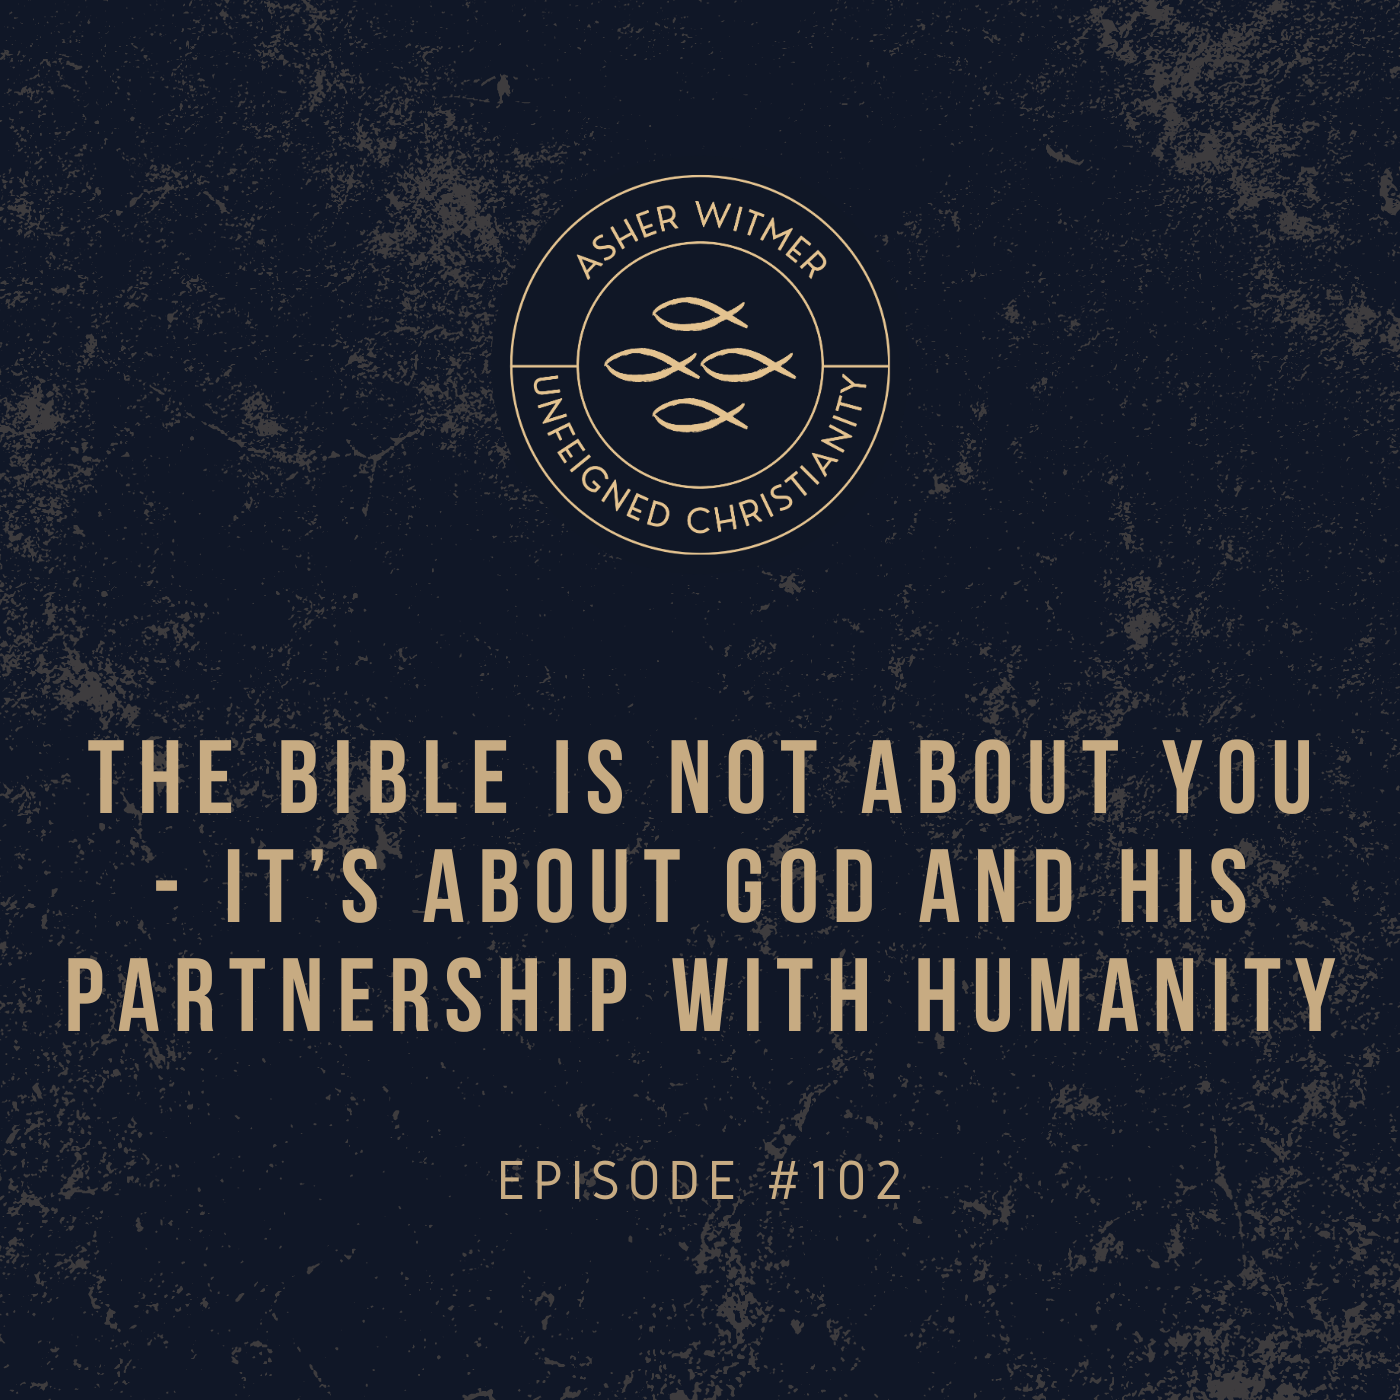 The Bible Is Not about You - It's about God and His Partnership with Humanity